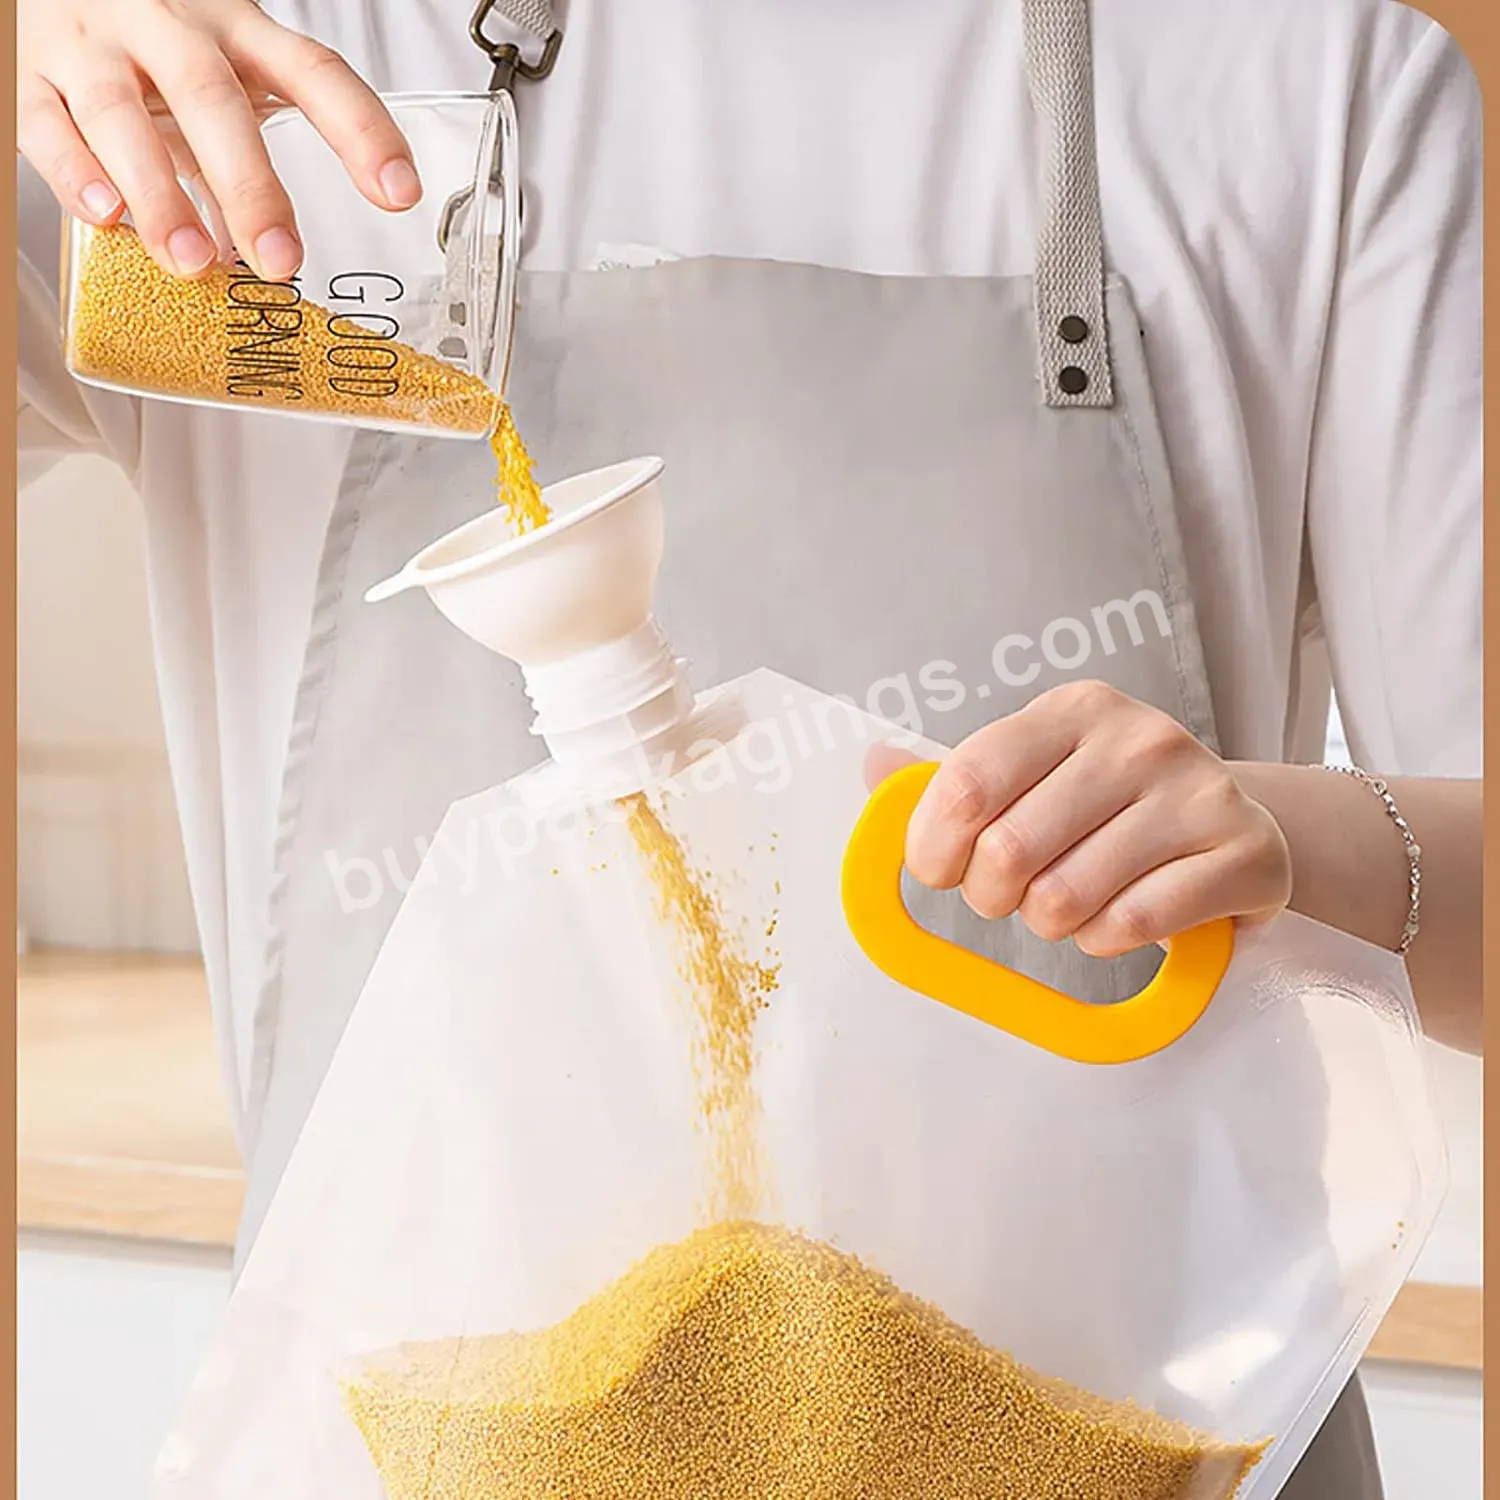 Large Capacity Grain Moisture Proof Stand Up Pouch 1kg 5kg Rice Packaging Bags Drinking Water Bag With Handle Spout Pouch - Buy Large Capacity Grain Moisture Proof Stand Up Pouch,1kg 5kg Rice Packaging Bags,Drinking Water Bag With Handle Spout Pouch.